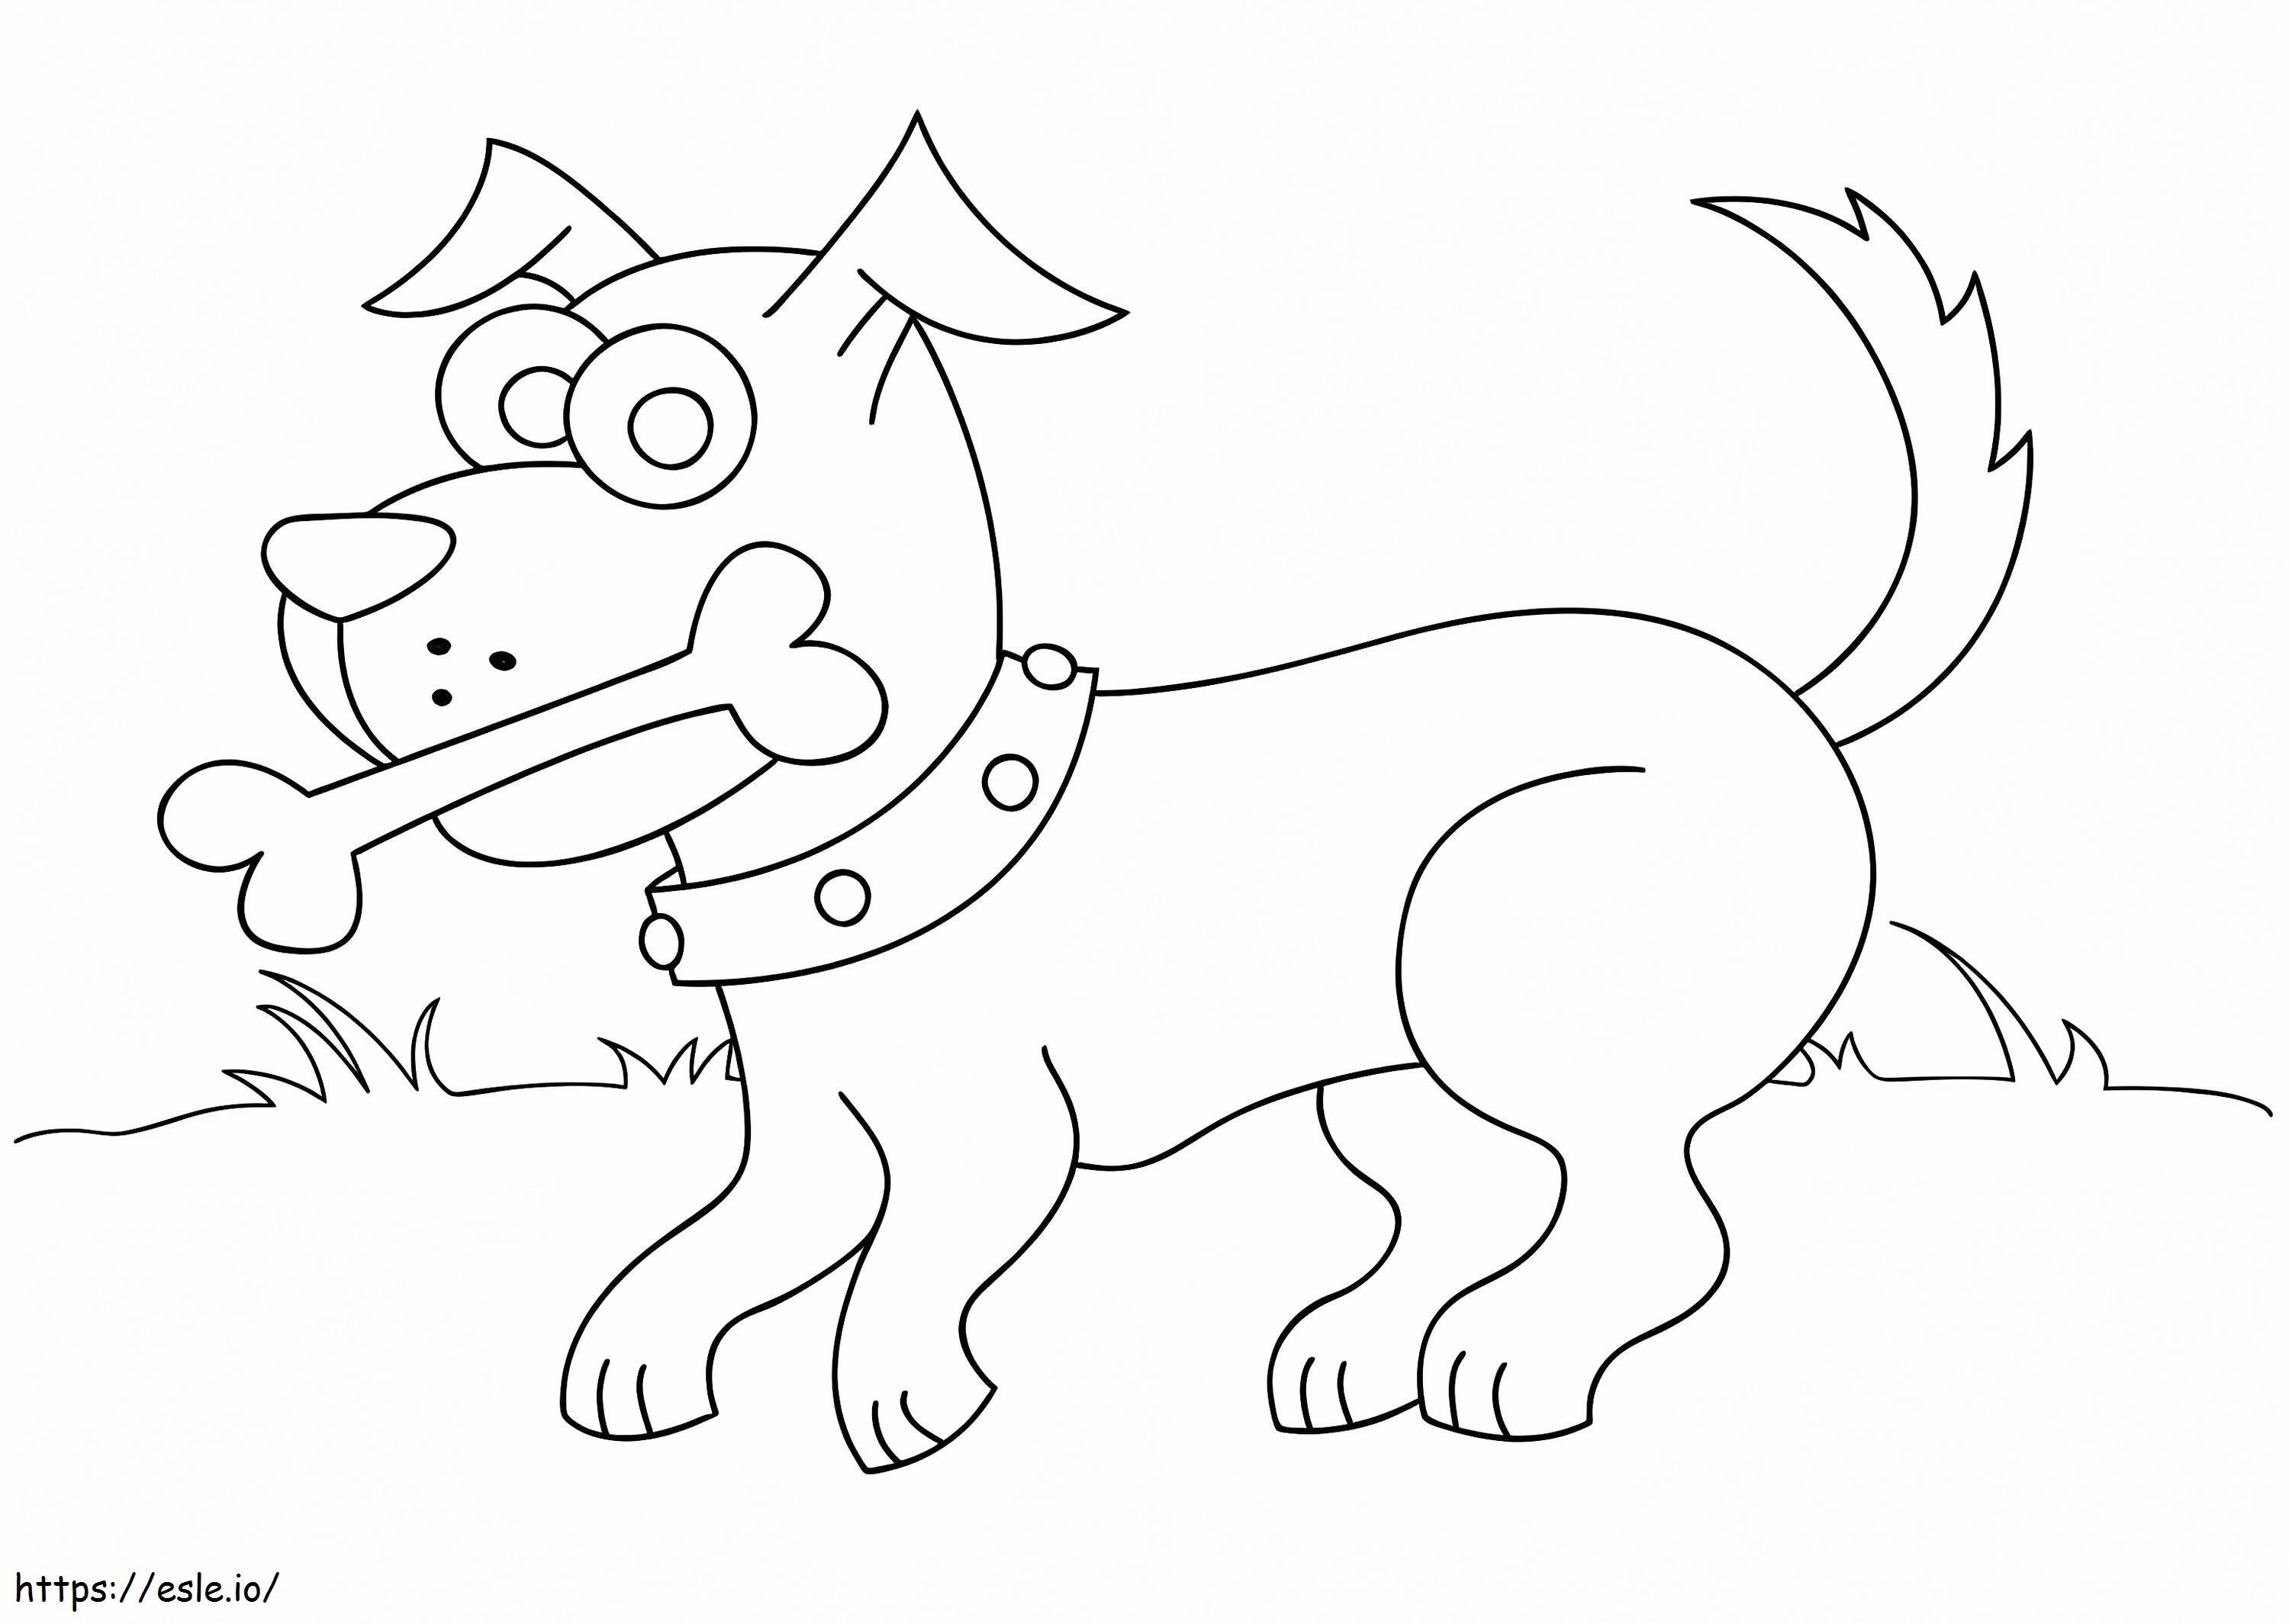 Puppy And Bone coloring page